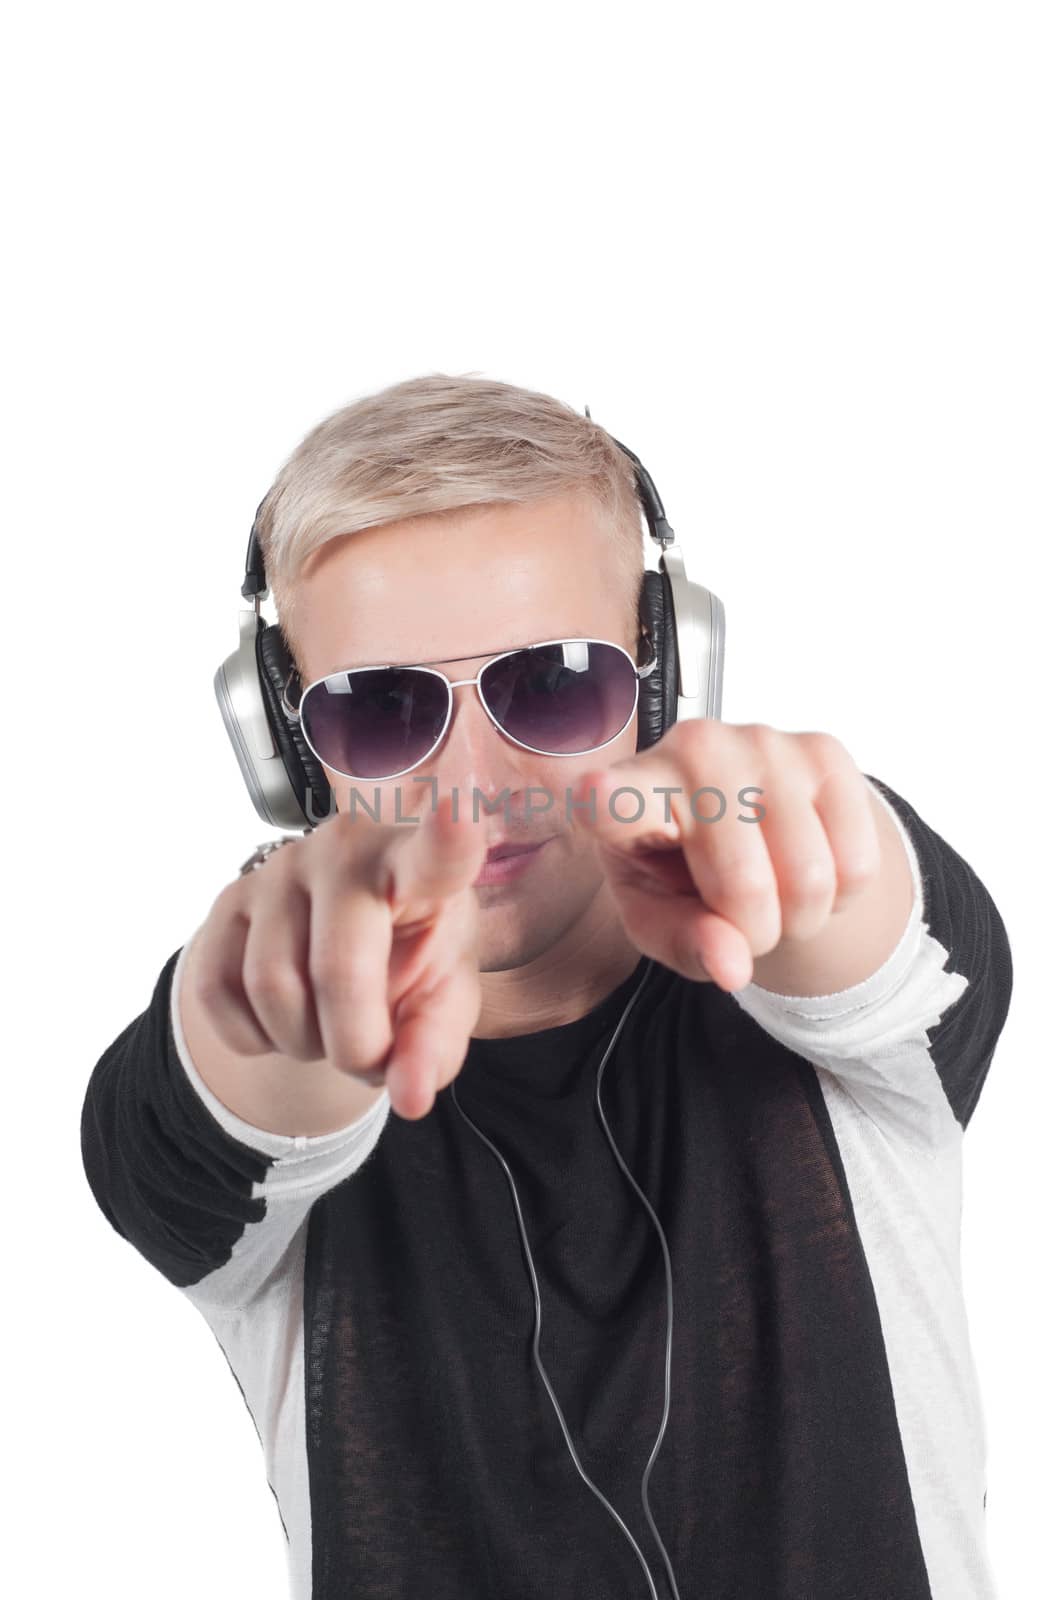 Man with headphones pointing his fingers by anytka